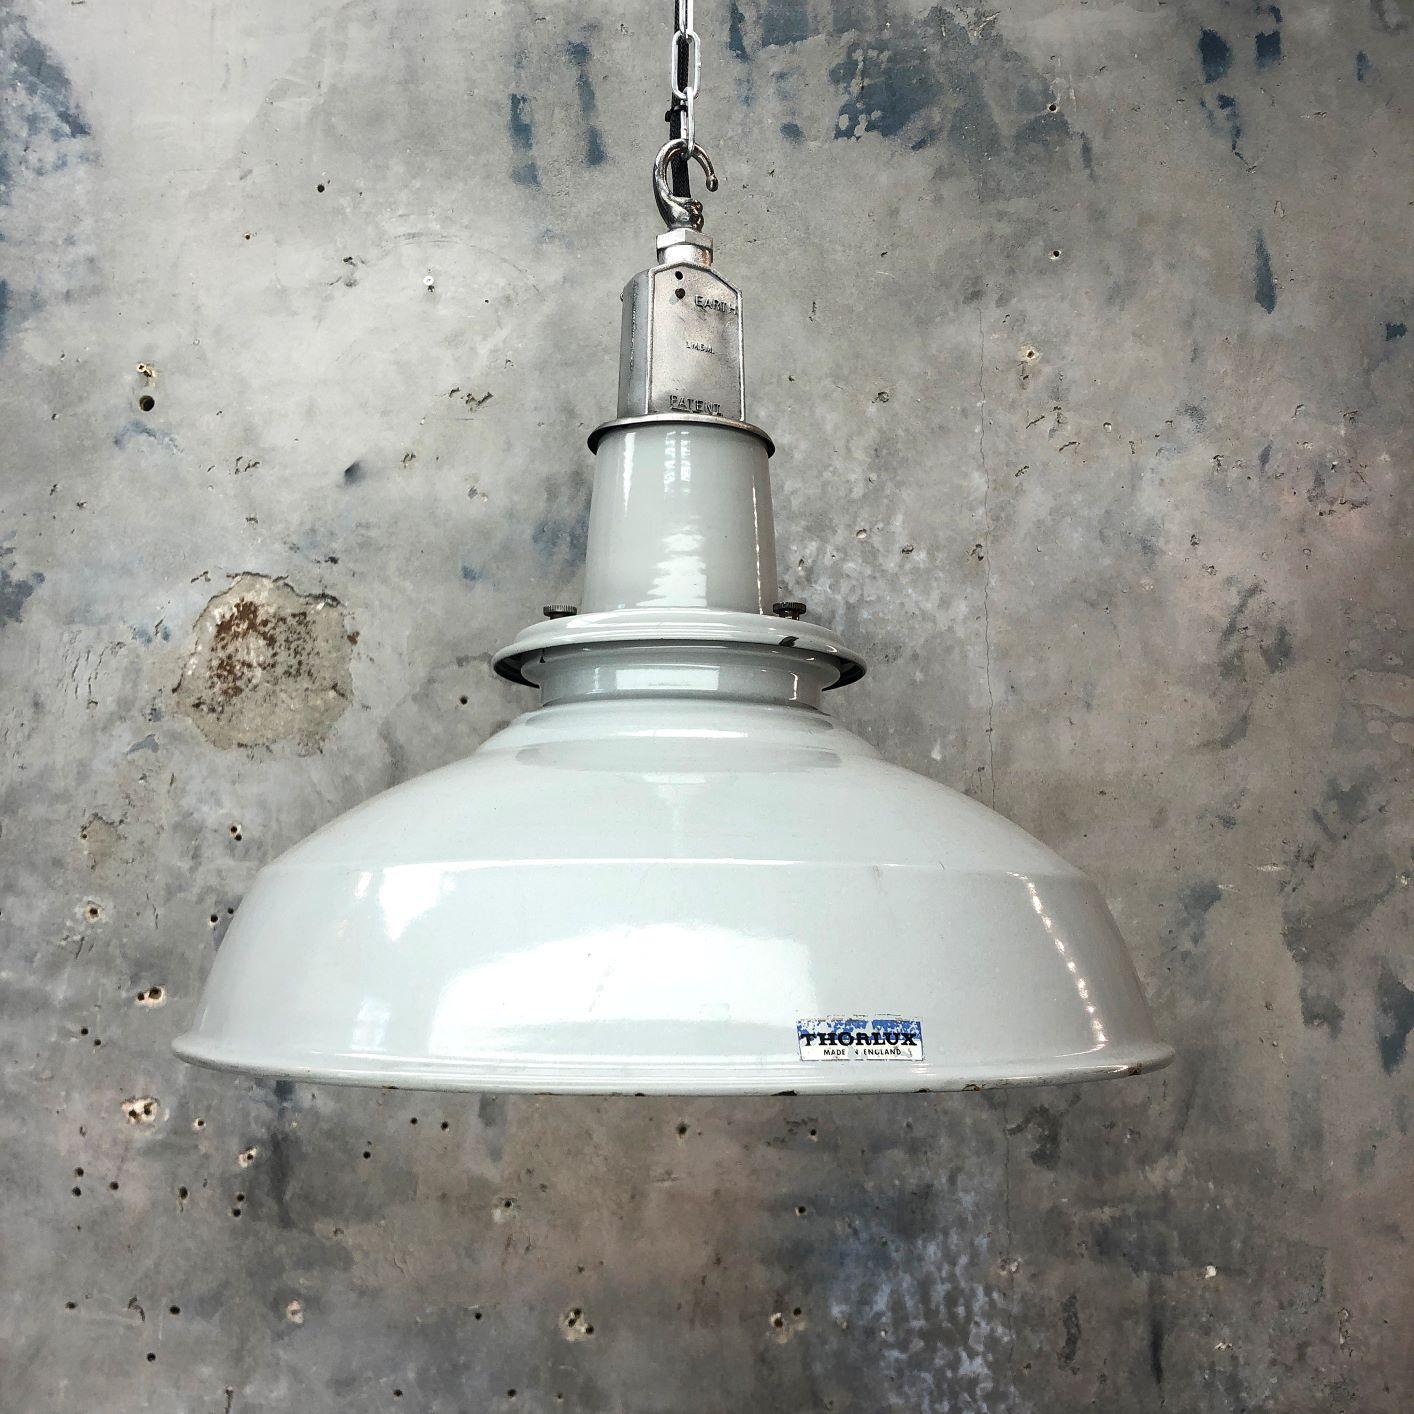 A midcentury Classic industrial grey enamel factory ceiling light made in England by Thorlux.

Thorlux are a designer, manufacturer and supplier of professional lighting systems since 1936. This factory pendant has been restored by hand in UK by